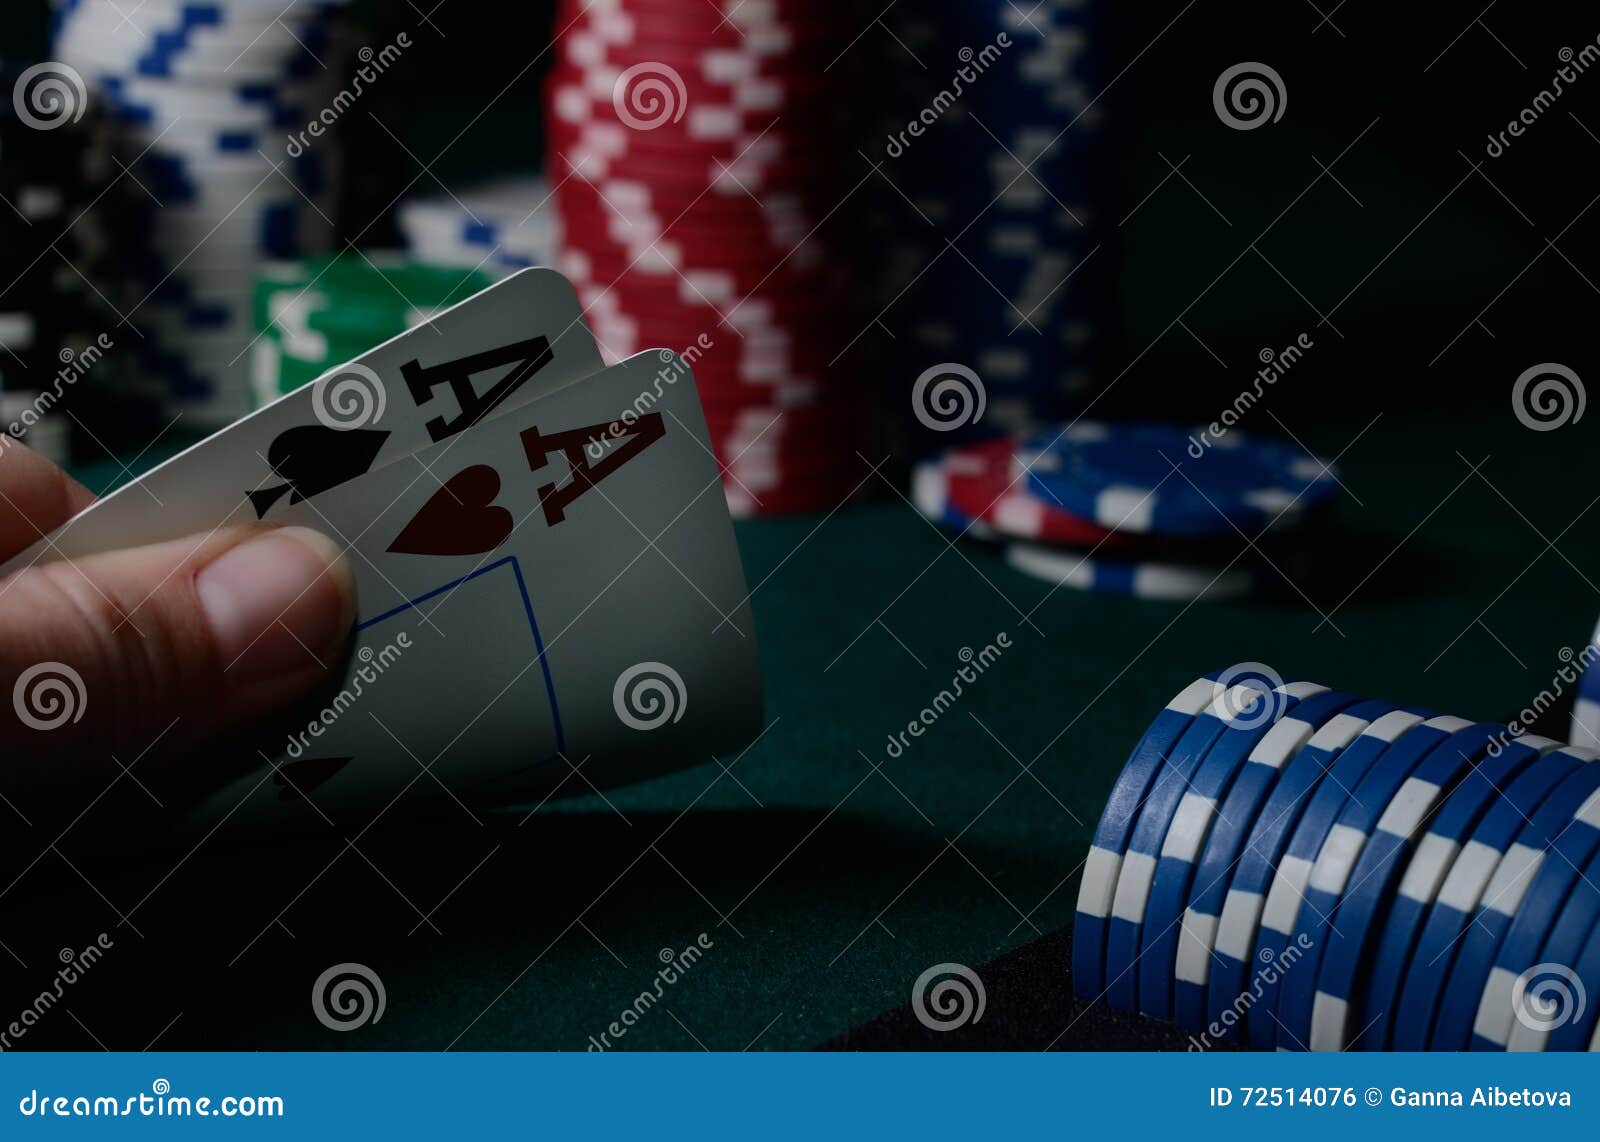 Casino Chips And Pair Of Aces On The Green Table. Poker ...